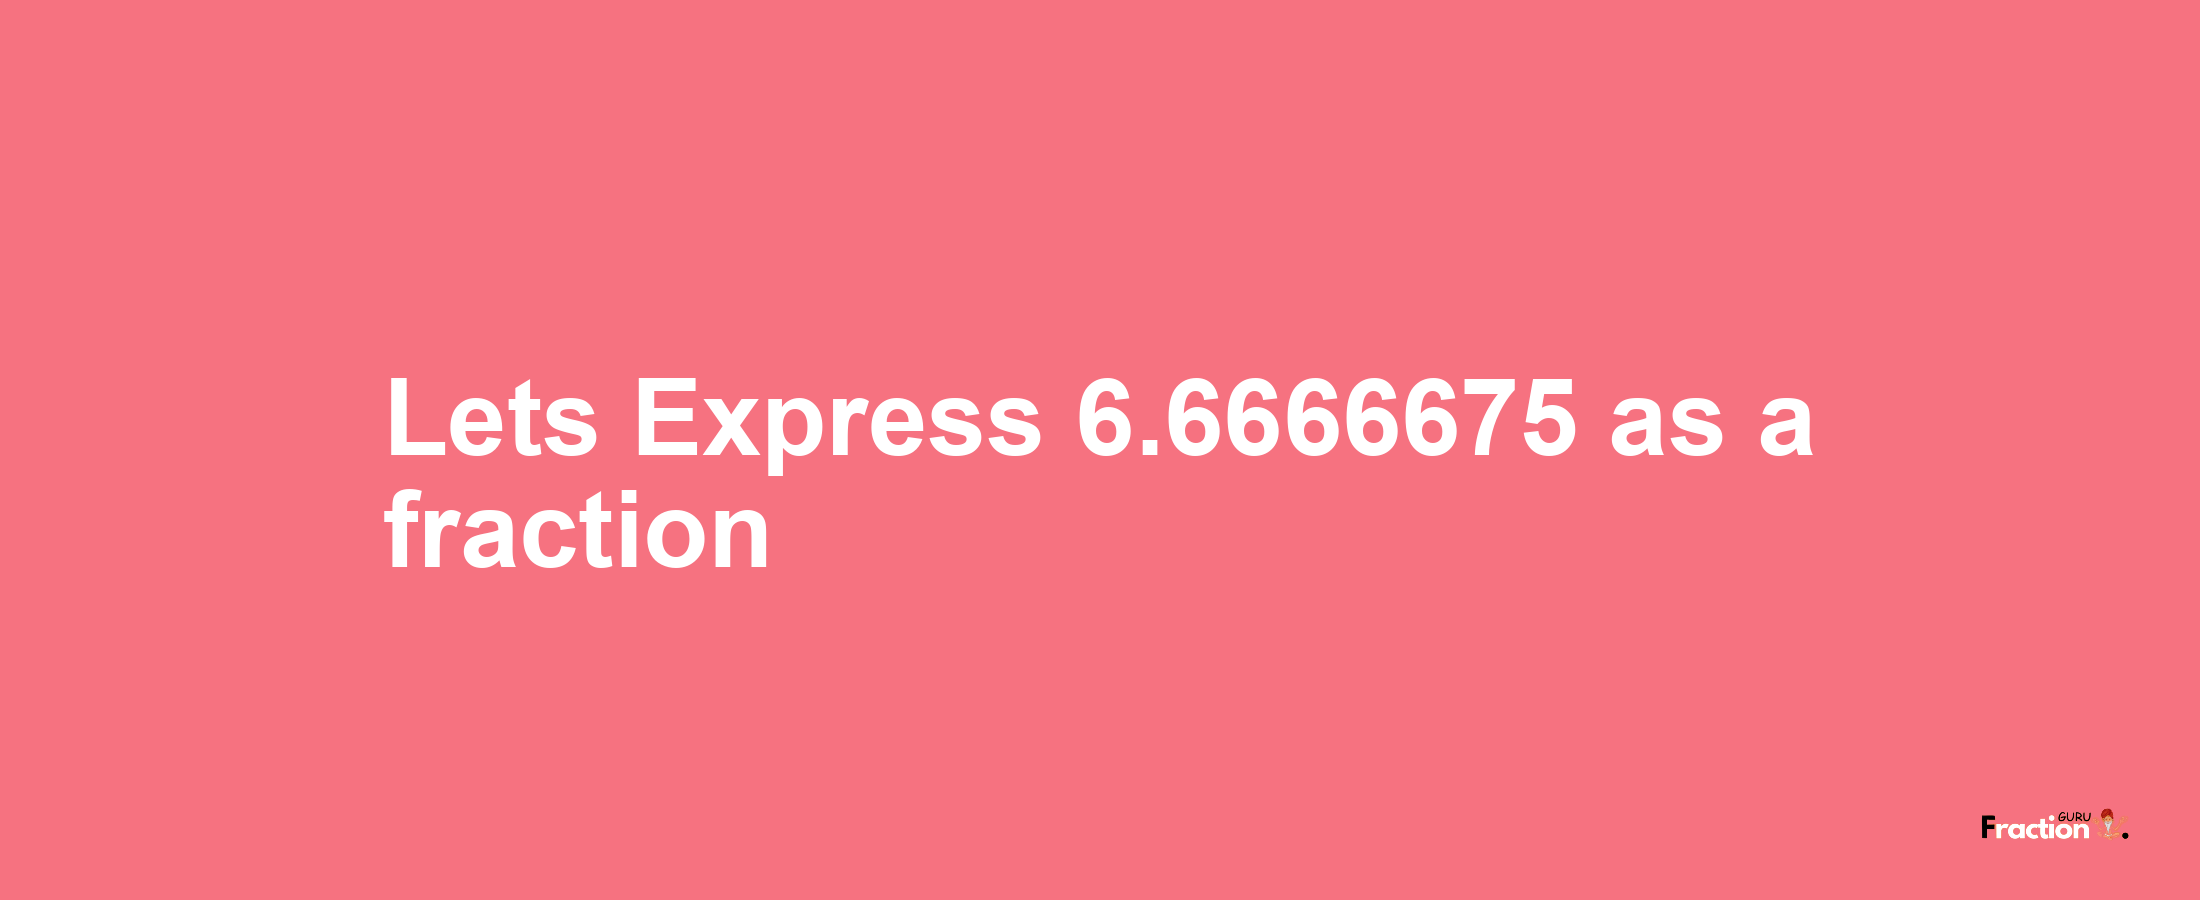 Lets Express 6.6666675 as afraction